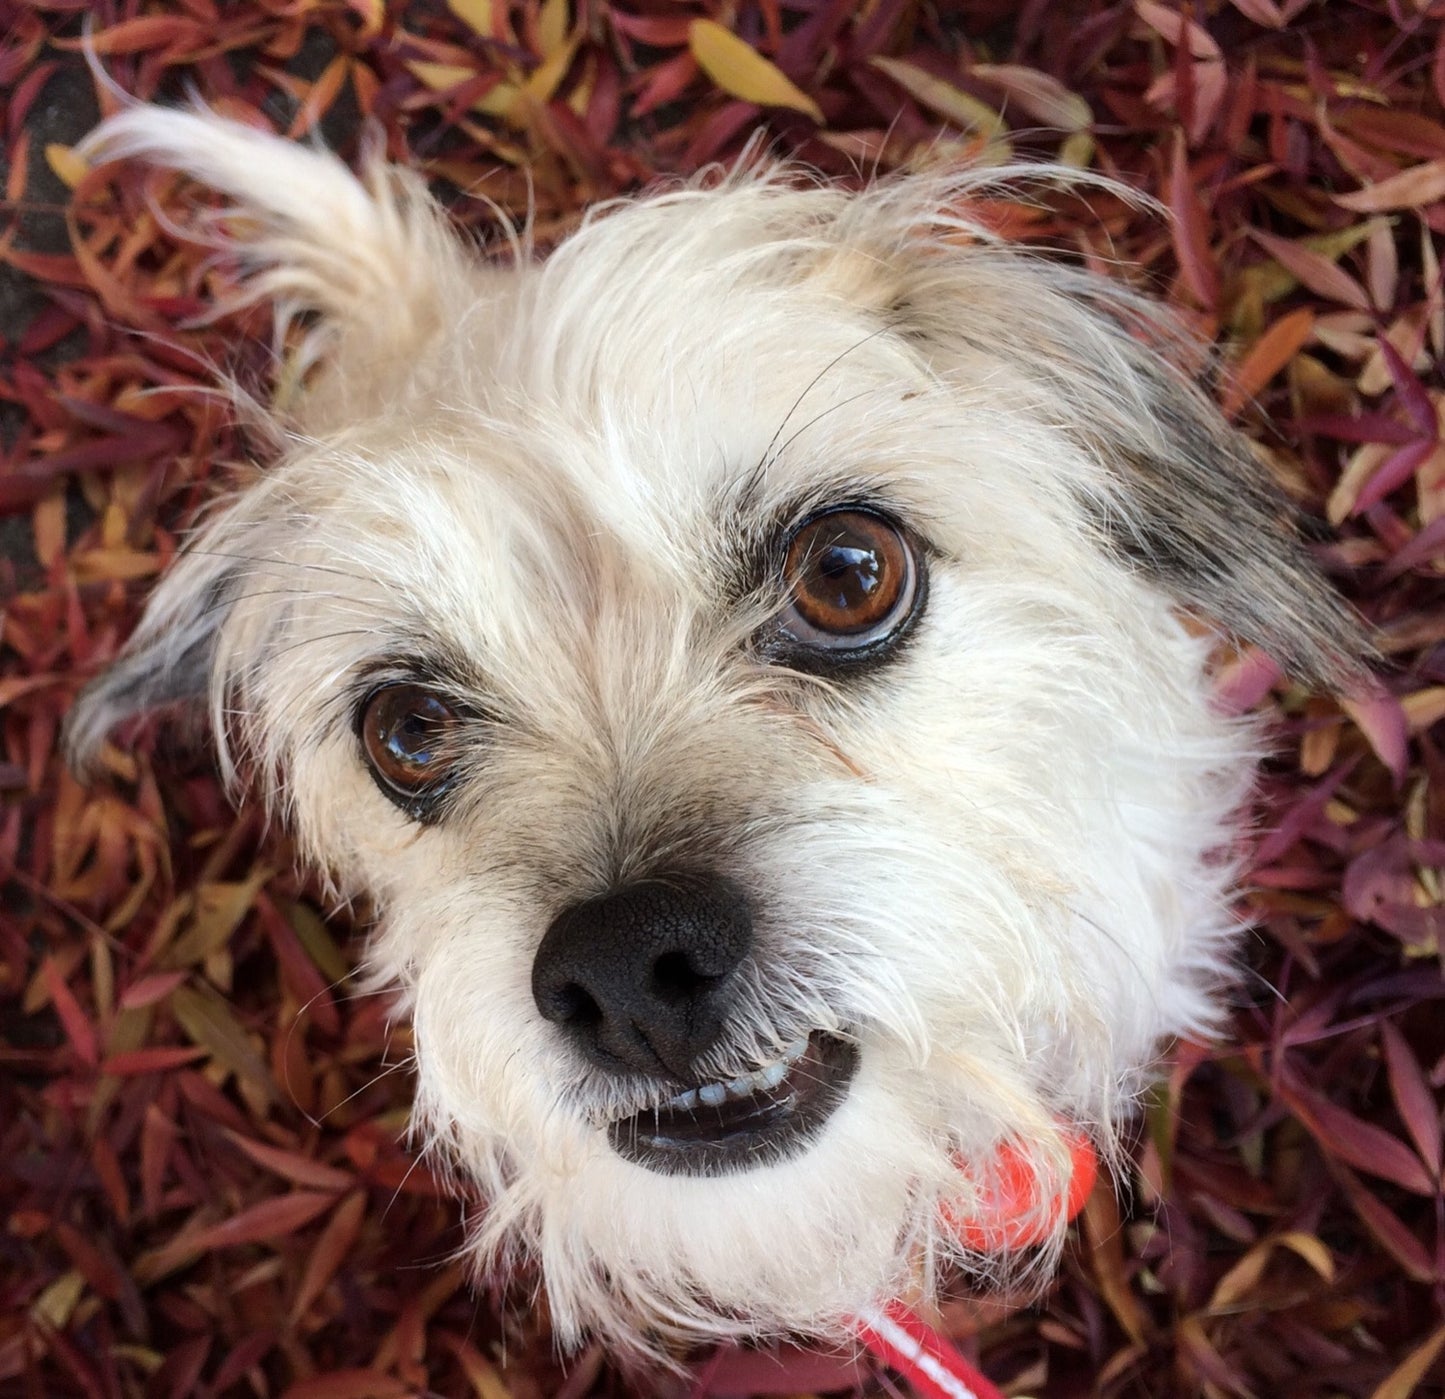 a photo of a white scruffy dog looking up at the camera sitting on leaves